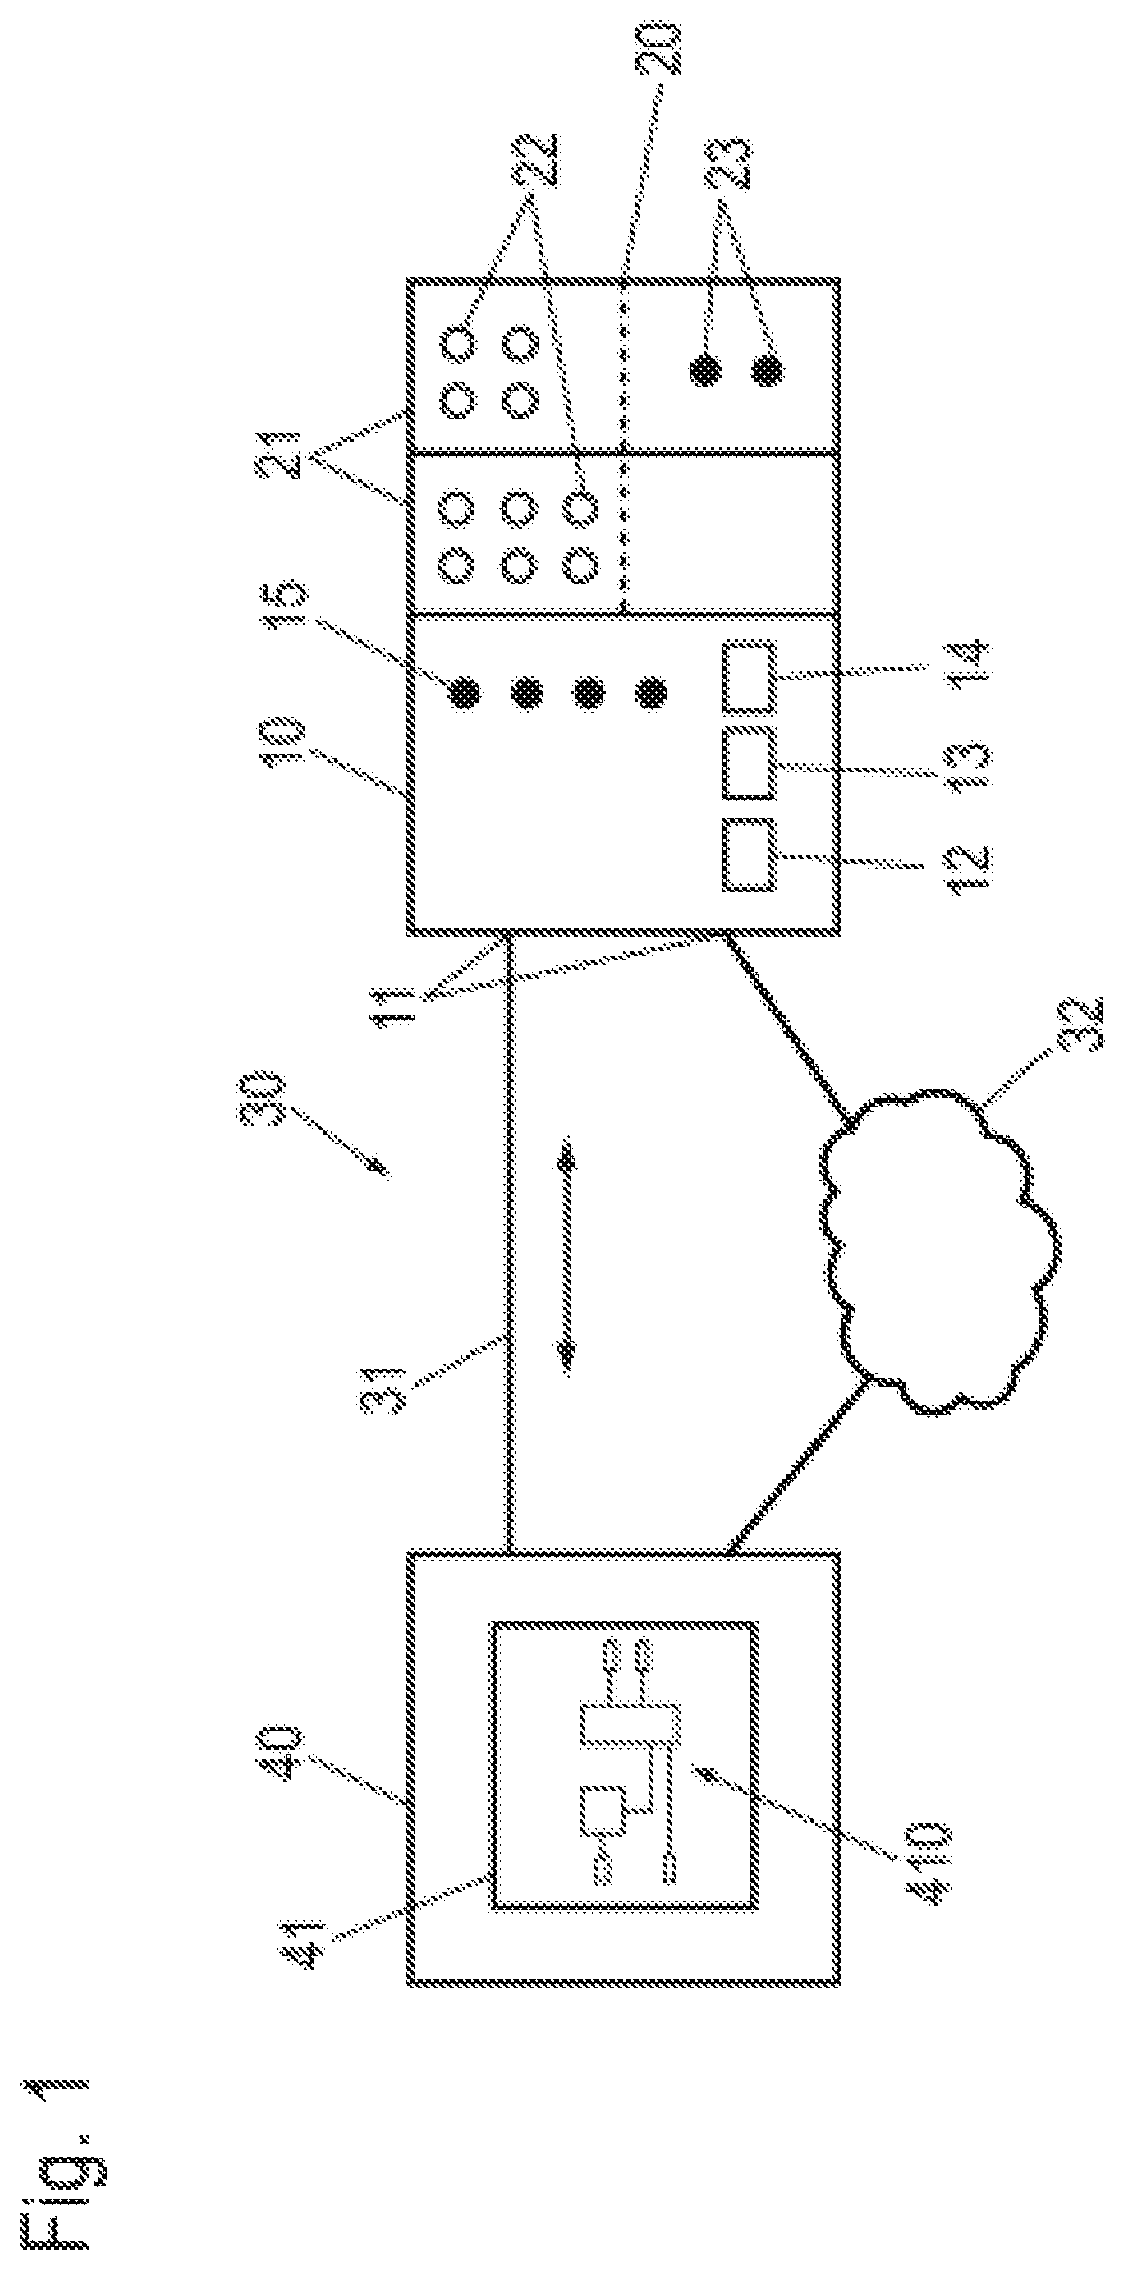 Control system for an industrial automation facility and method for programming and operating such a control system